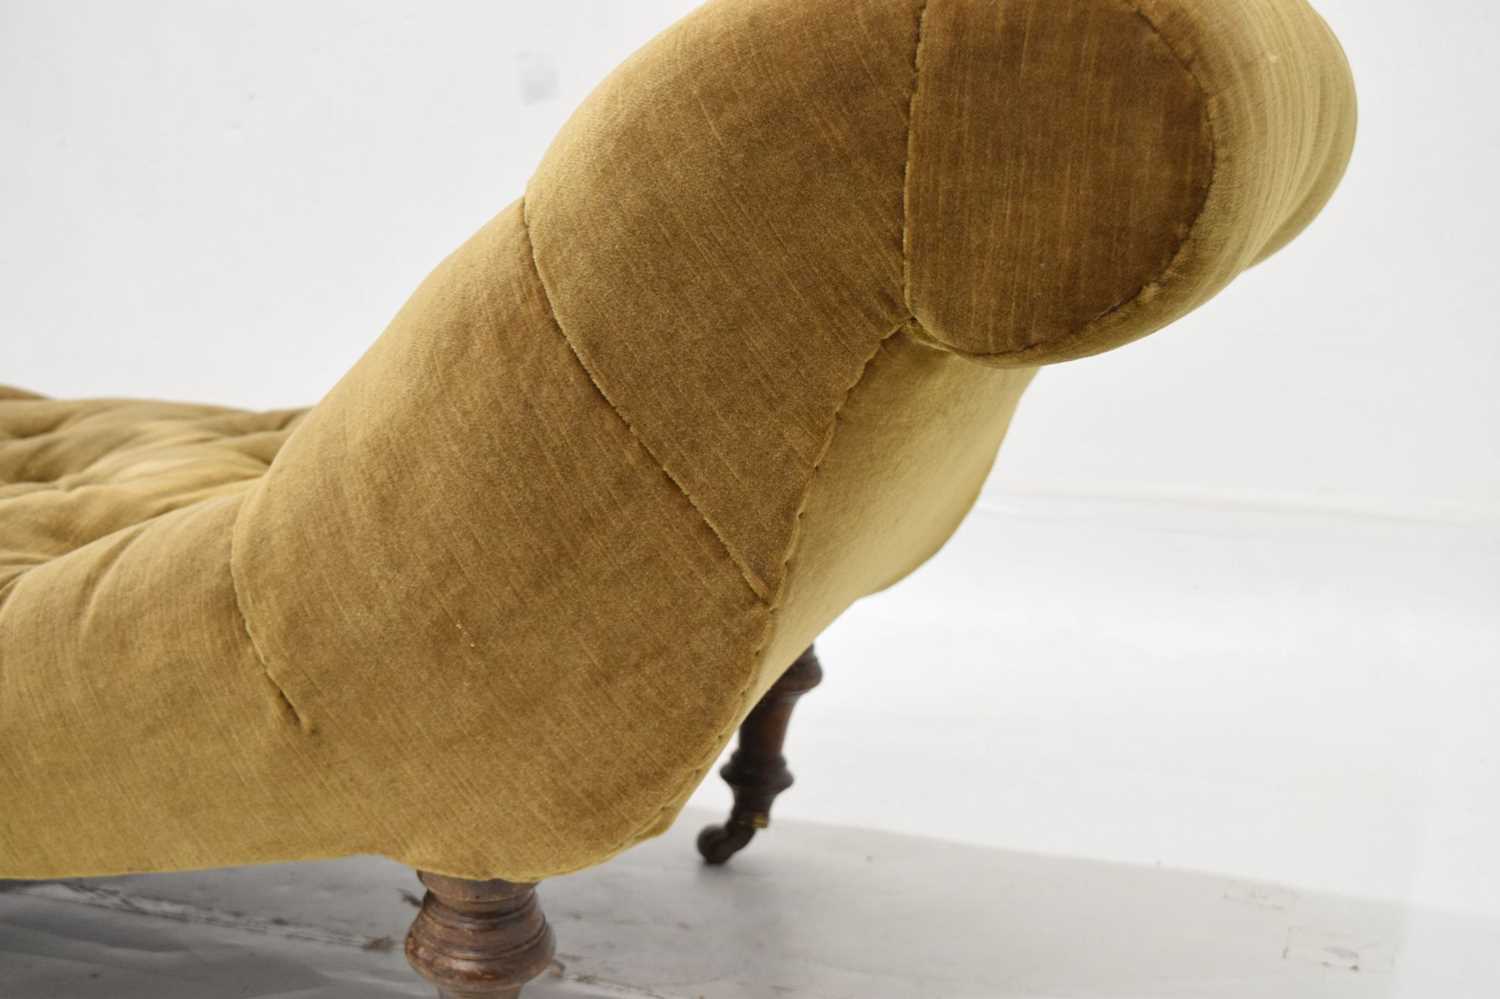 Late 19th/early 20th century chaise longue - Image 9 of 9